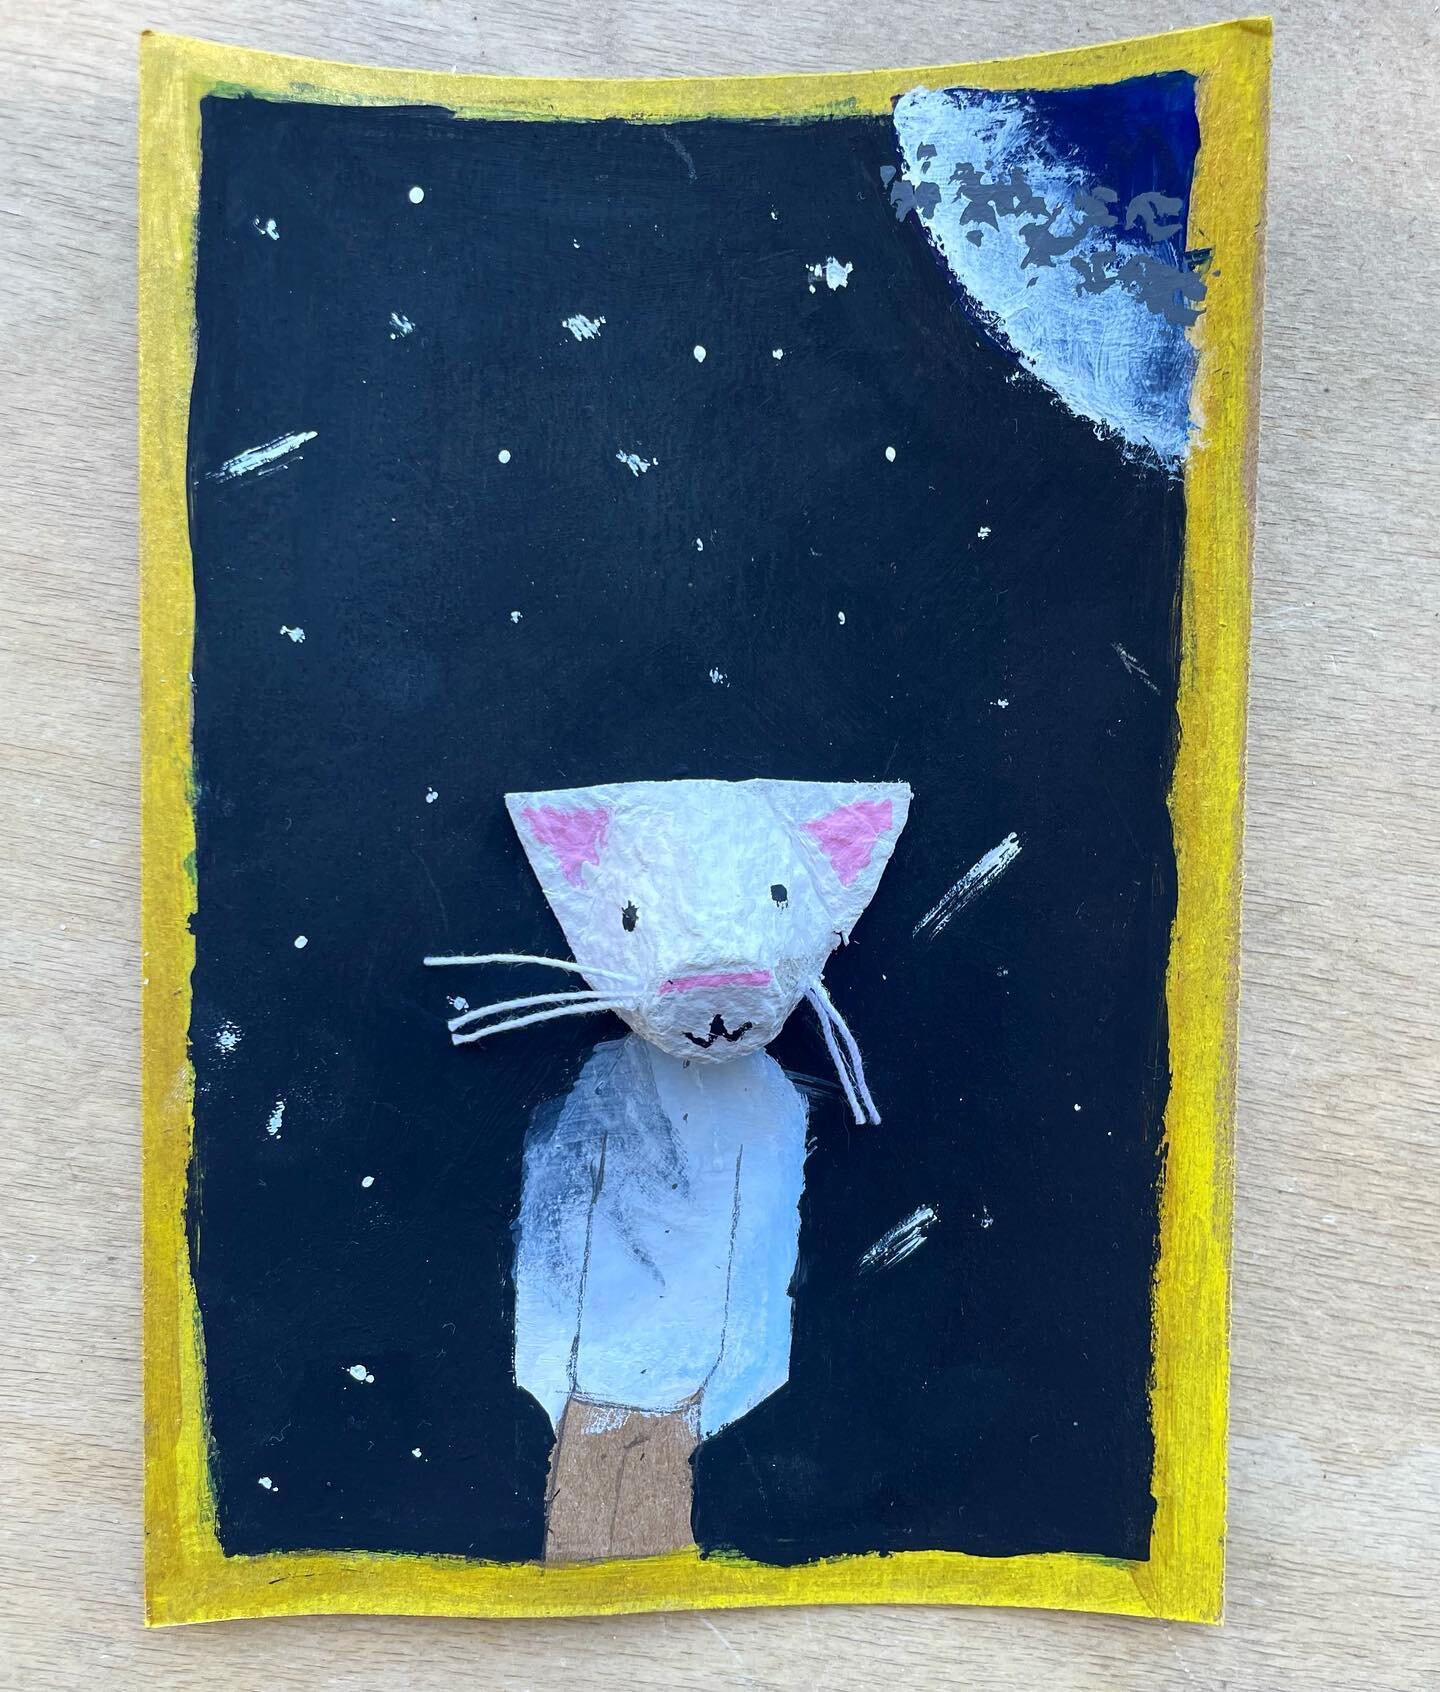 Mr. Biscuit in space, by the awesome Harper 🐈✨

Don&rsquo;t miss out, Art Camp happening again next week on Wednesday, 10/5!